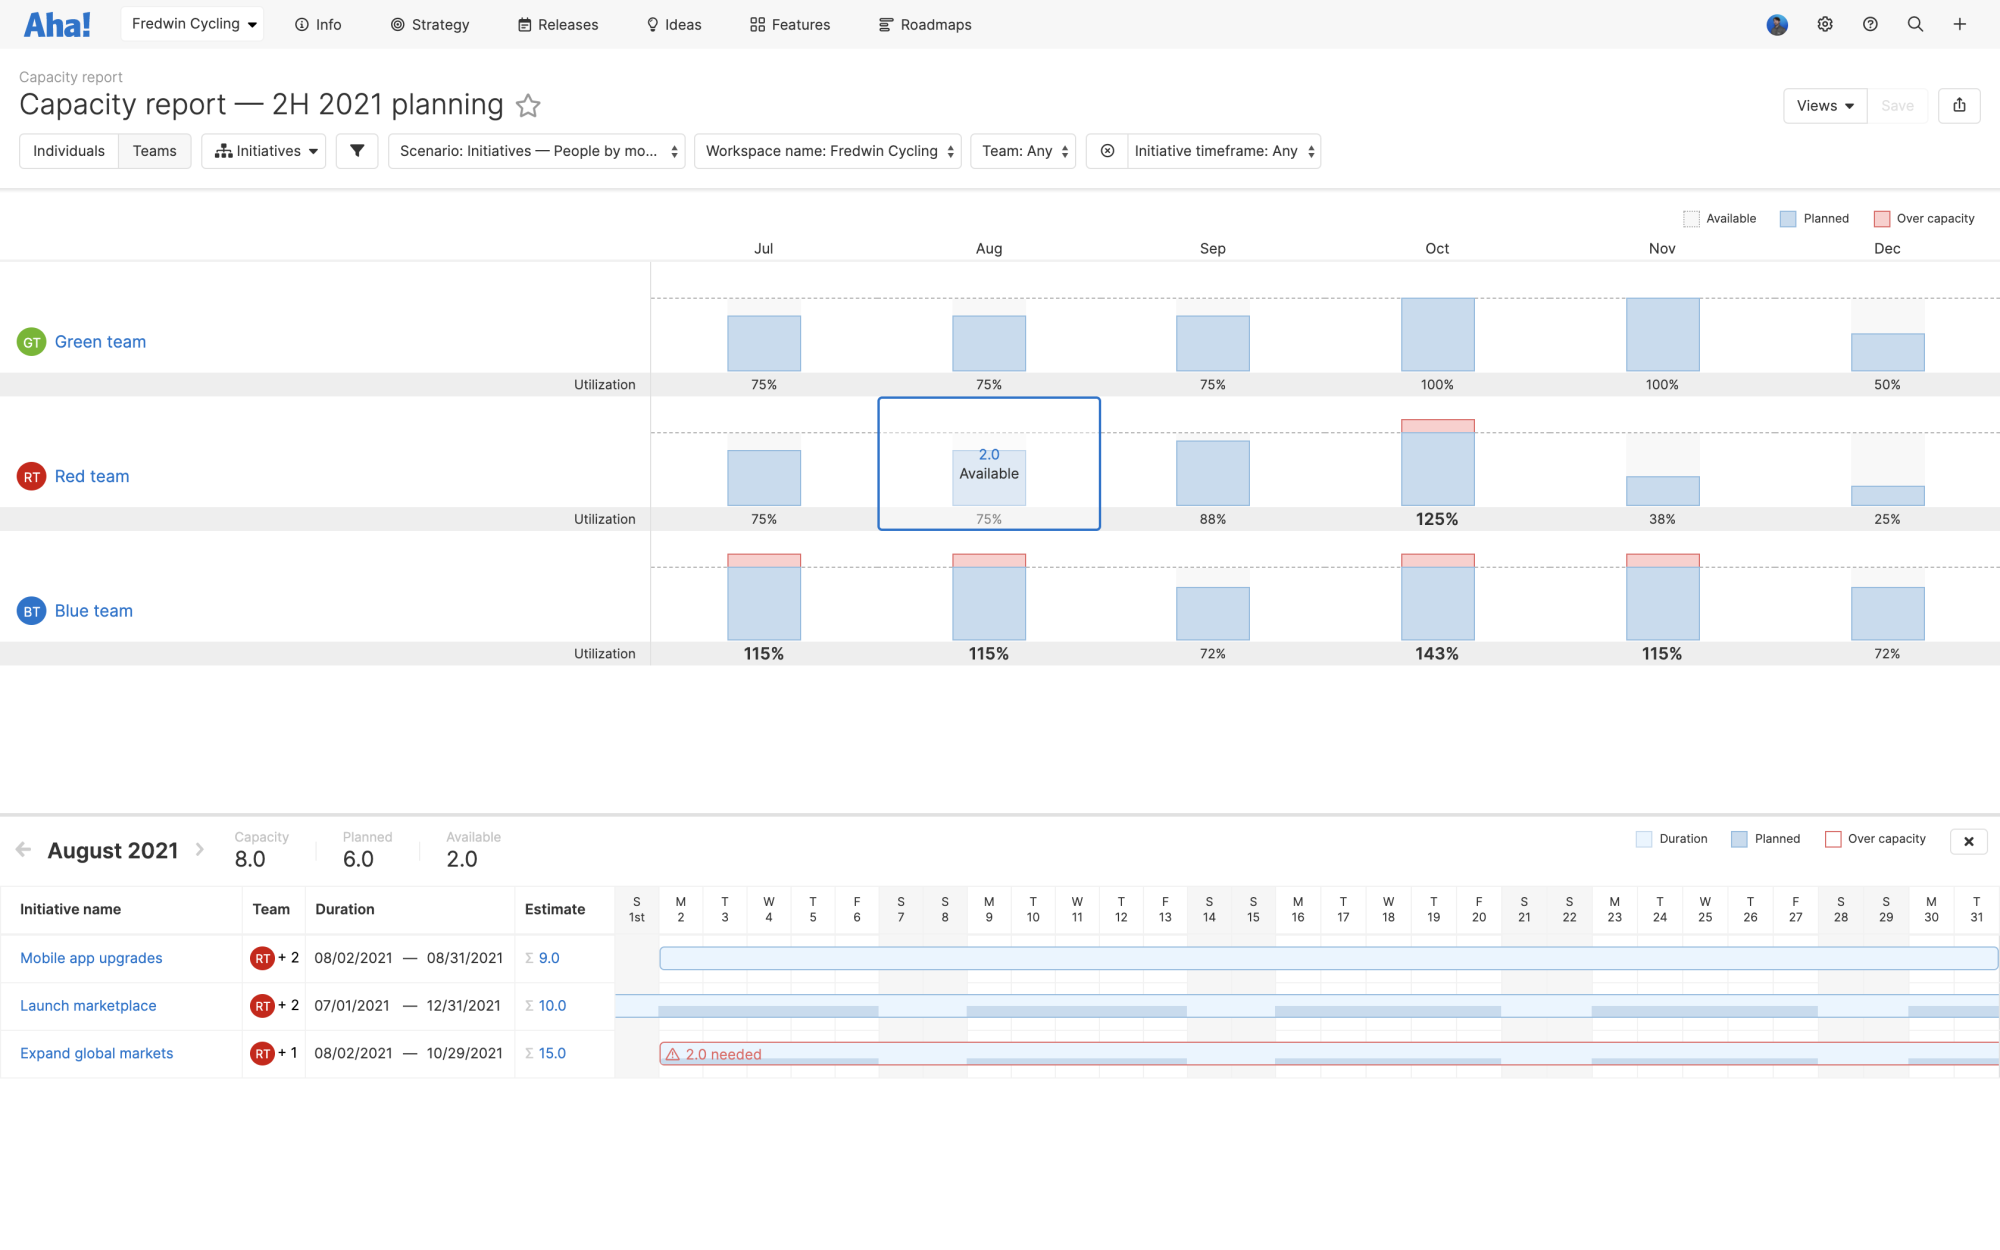 Capacity report for teams showing a capacity conflict in the timeline view for people-based estimates. 